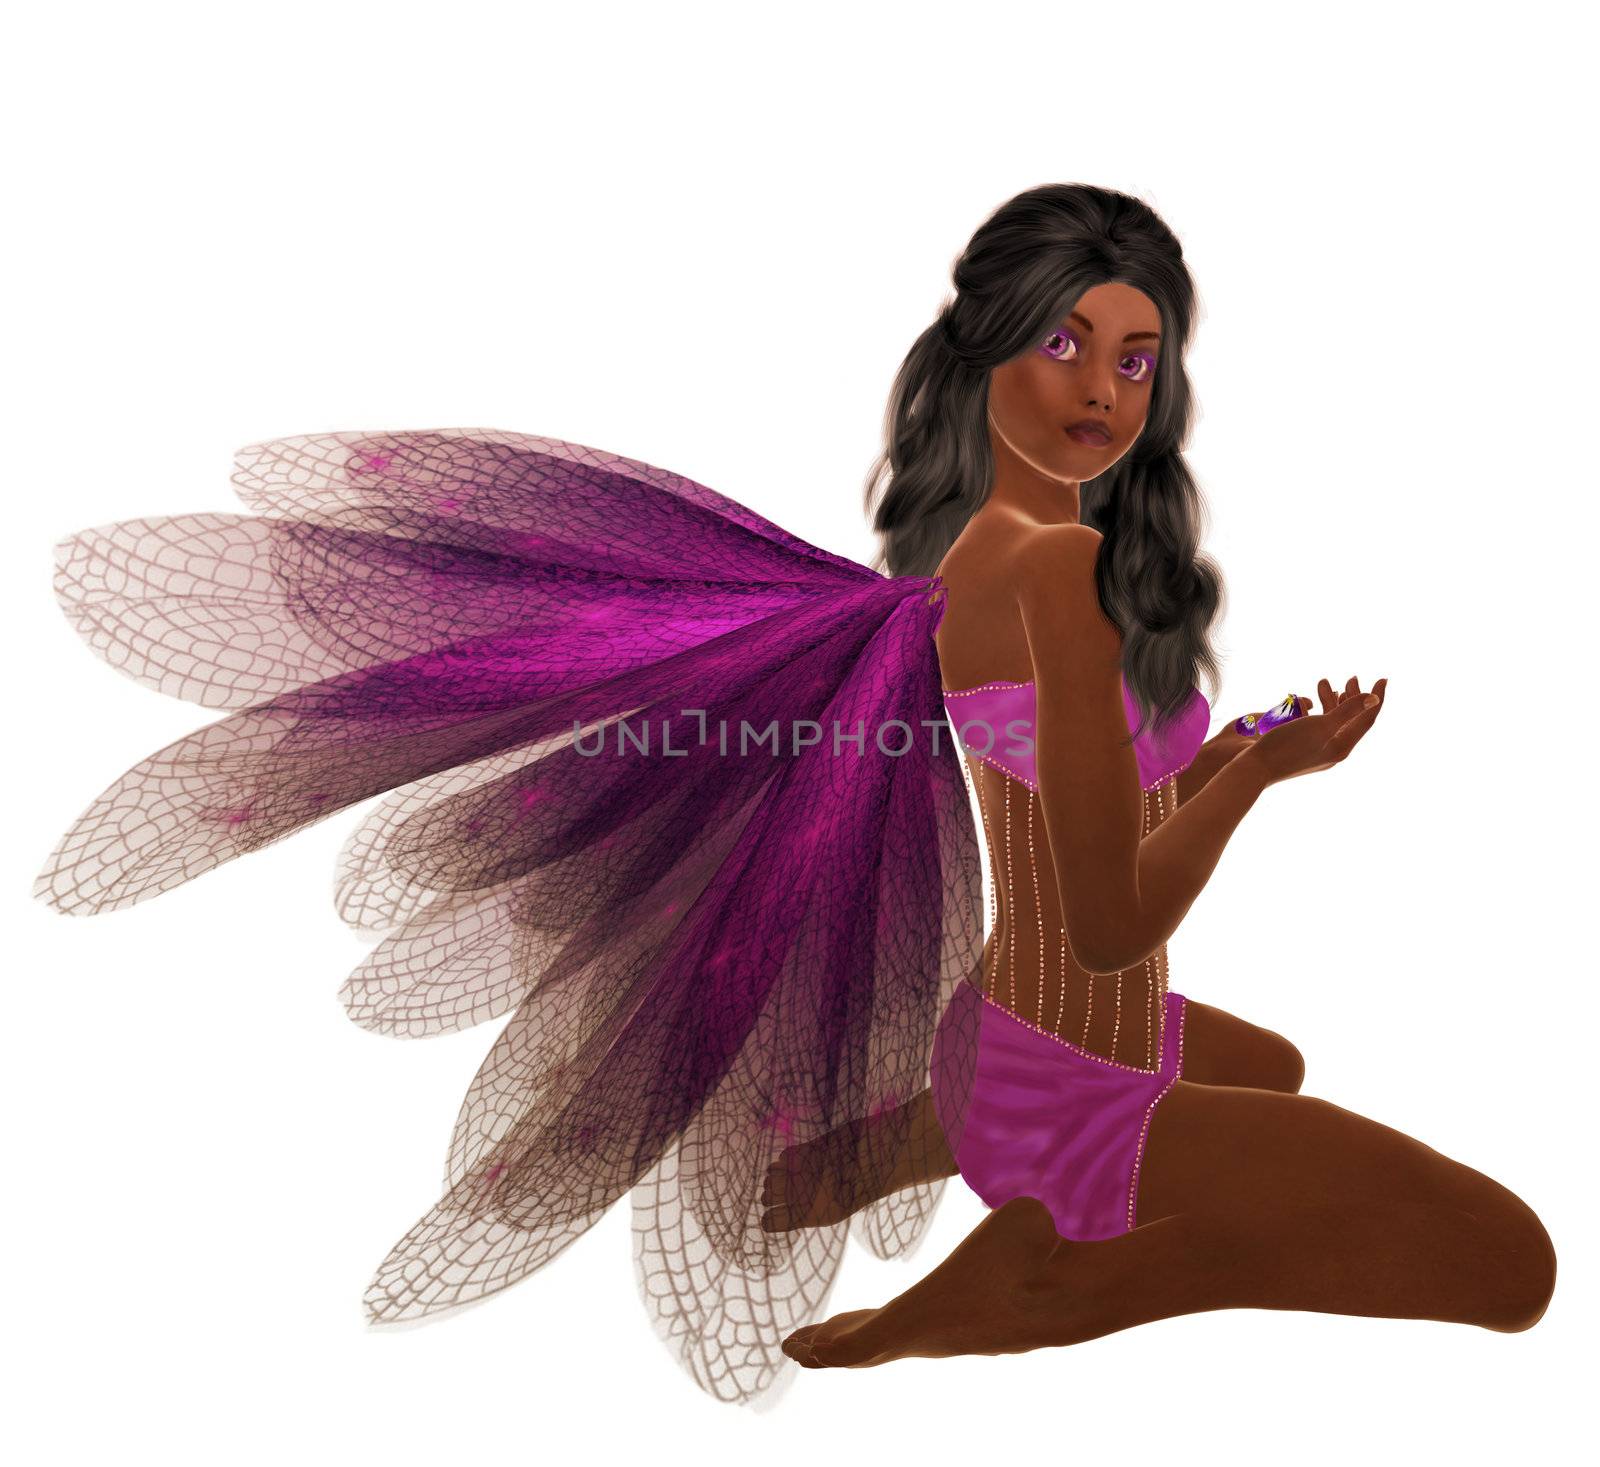 Purple fairy with dark hair, sitting holding flowers in her hand